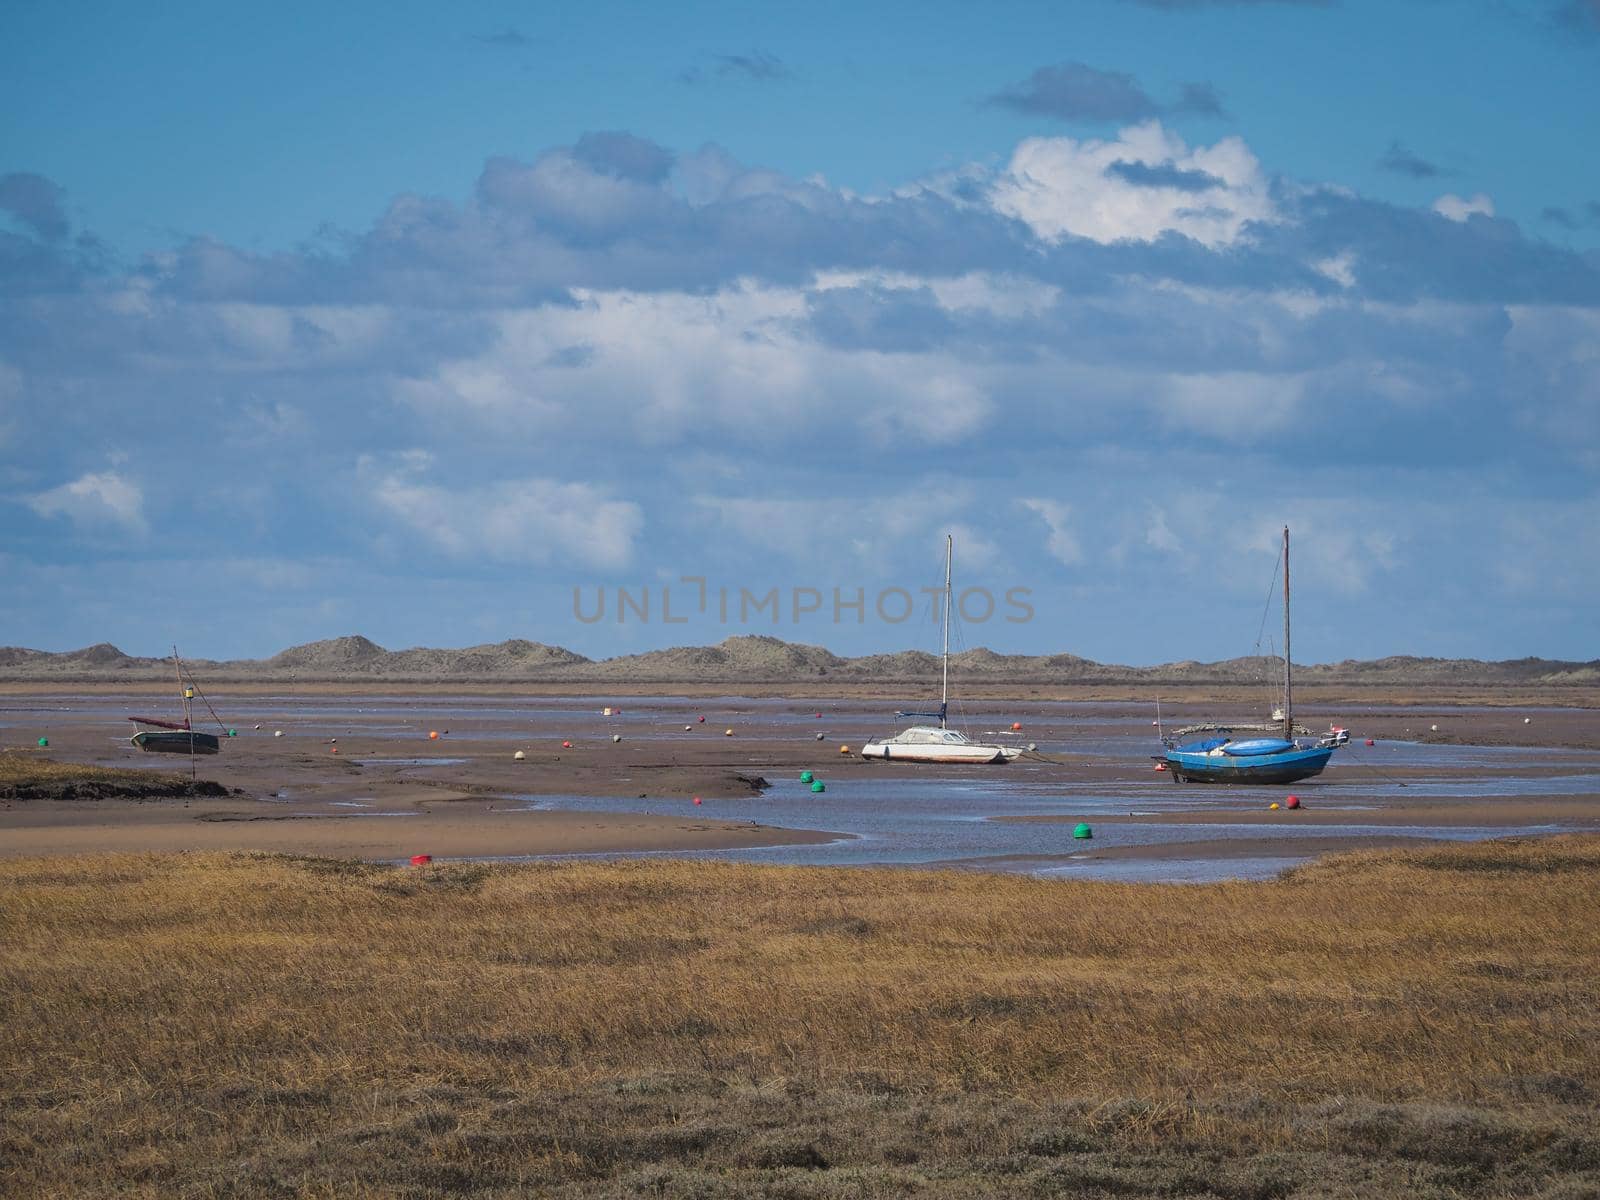 Boats aground waiting for the tide to come in on the expansive salt marshes under blue sky and white clouds, Blakeney National Nature Reserve, Norfolk, UK